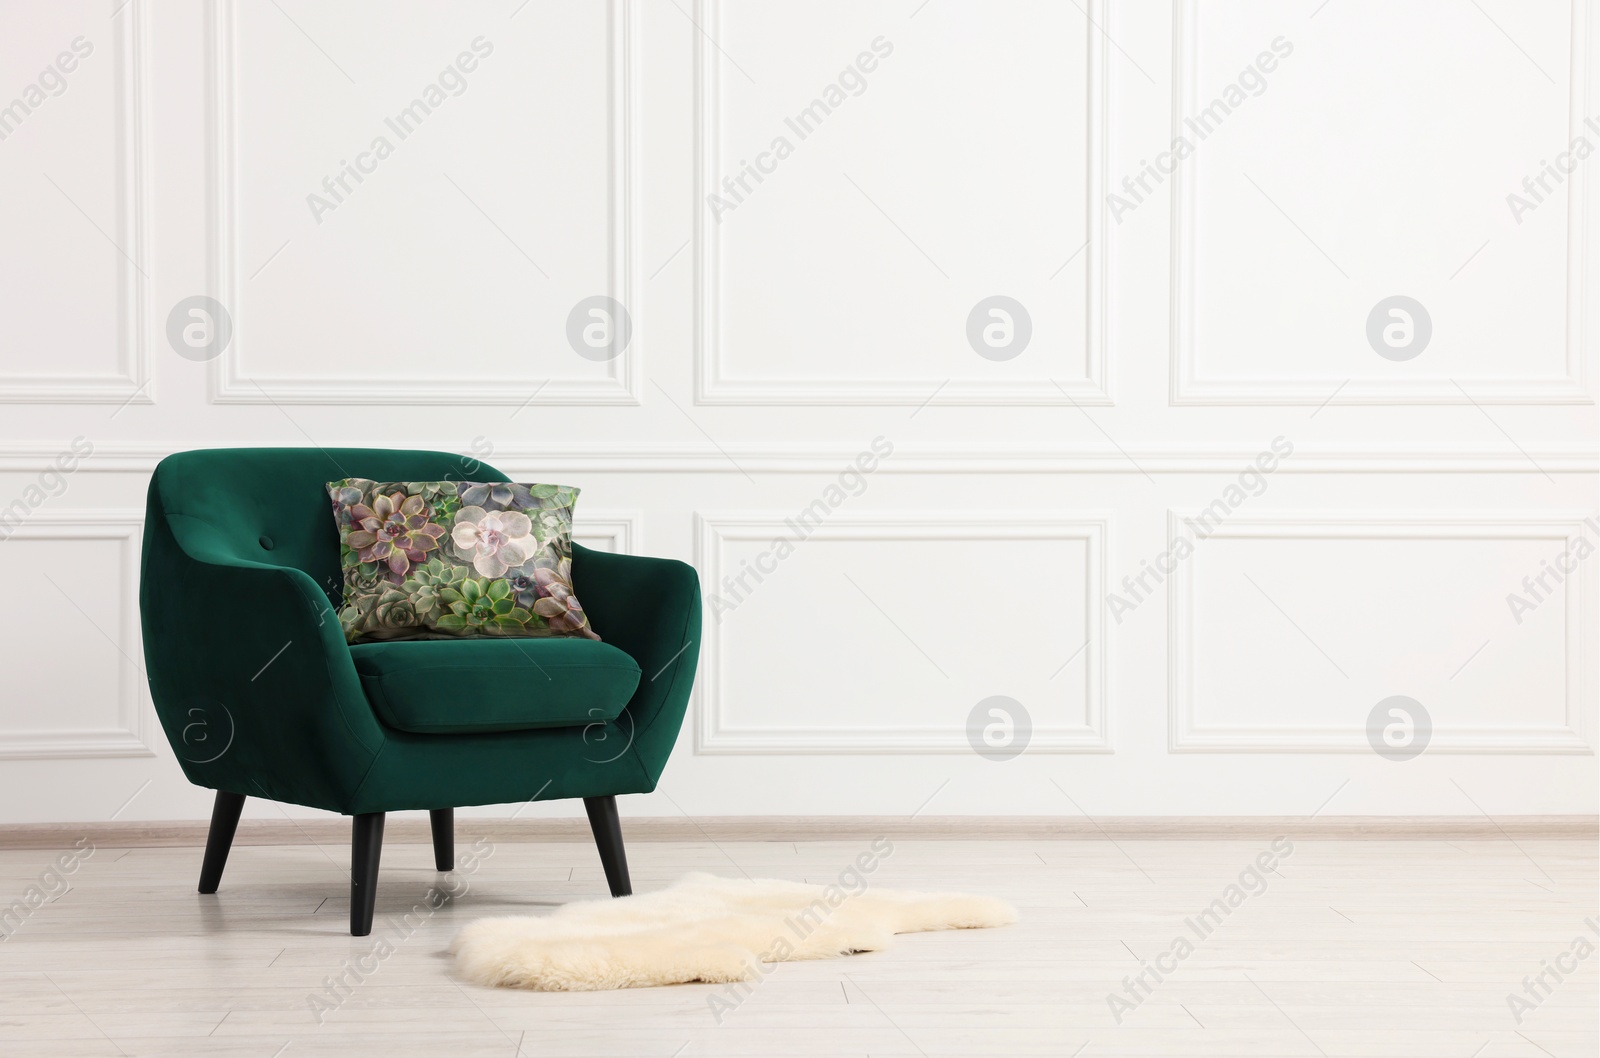 Image of Soft pillow with printed flowers on armchair indoors, space for text